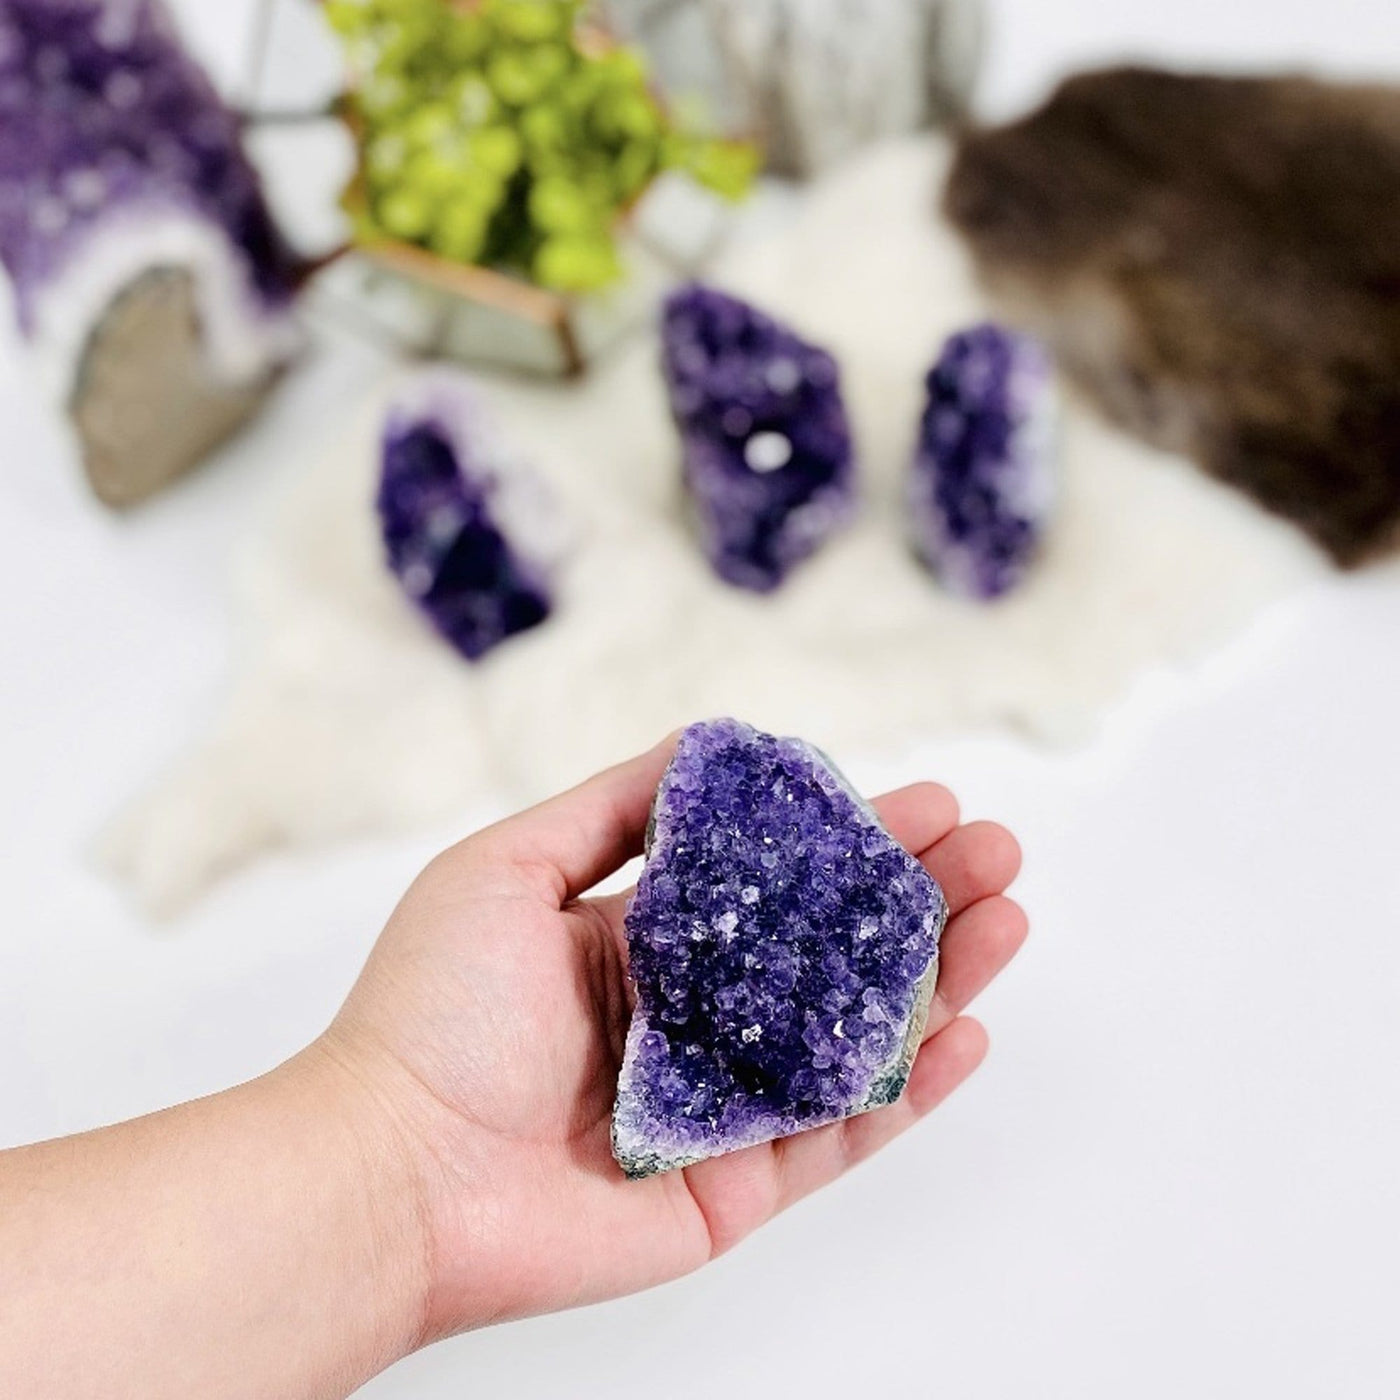 1/2 lb Amethyst Cluster Geode Crystal Cut Base in hand for size reference